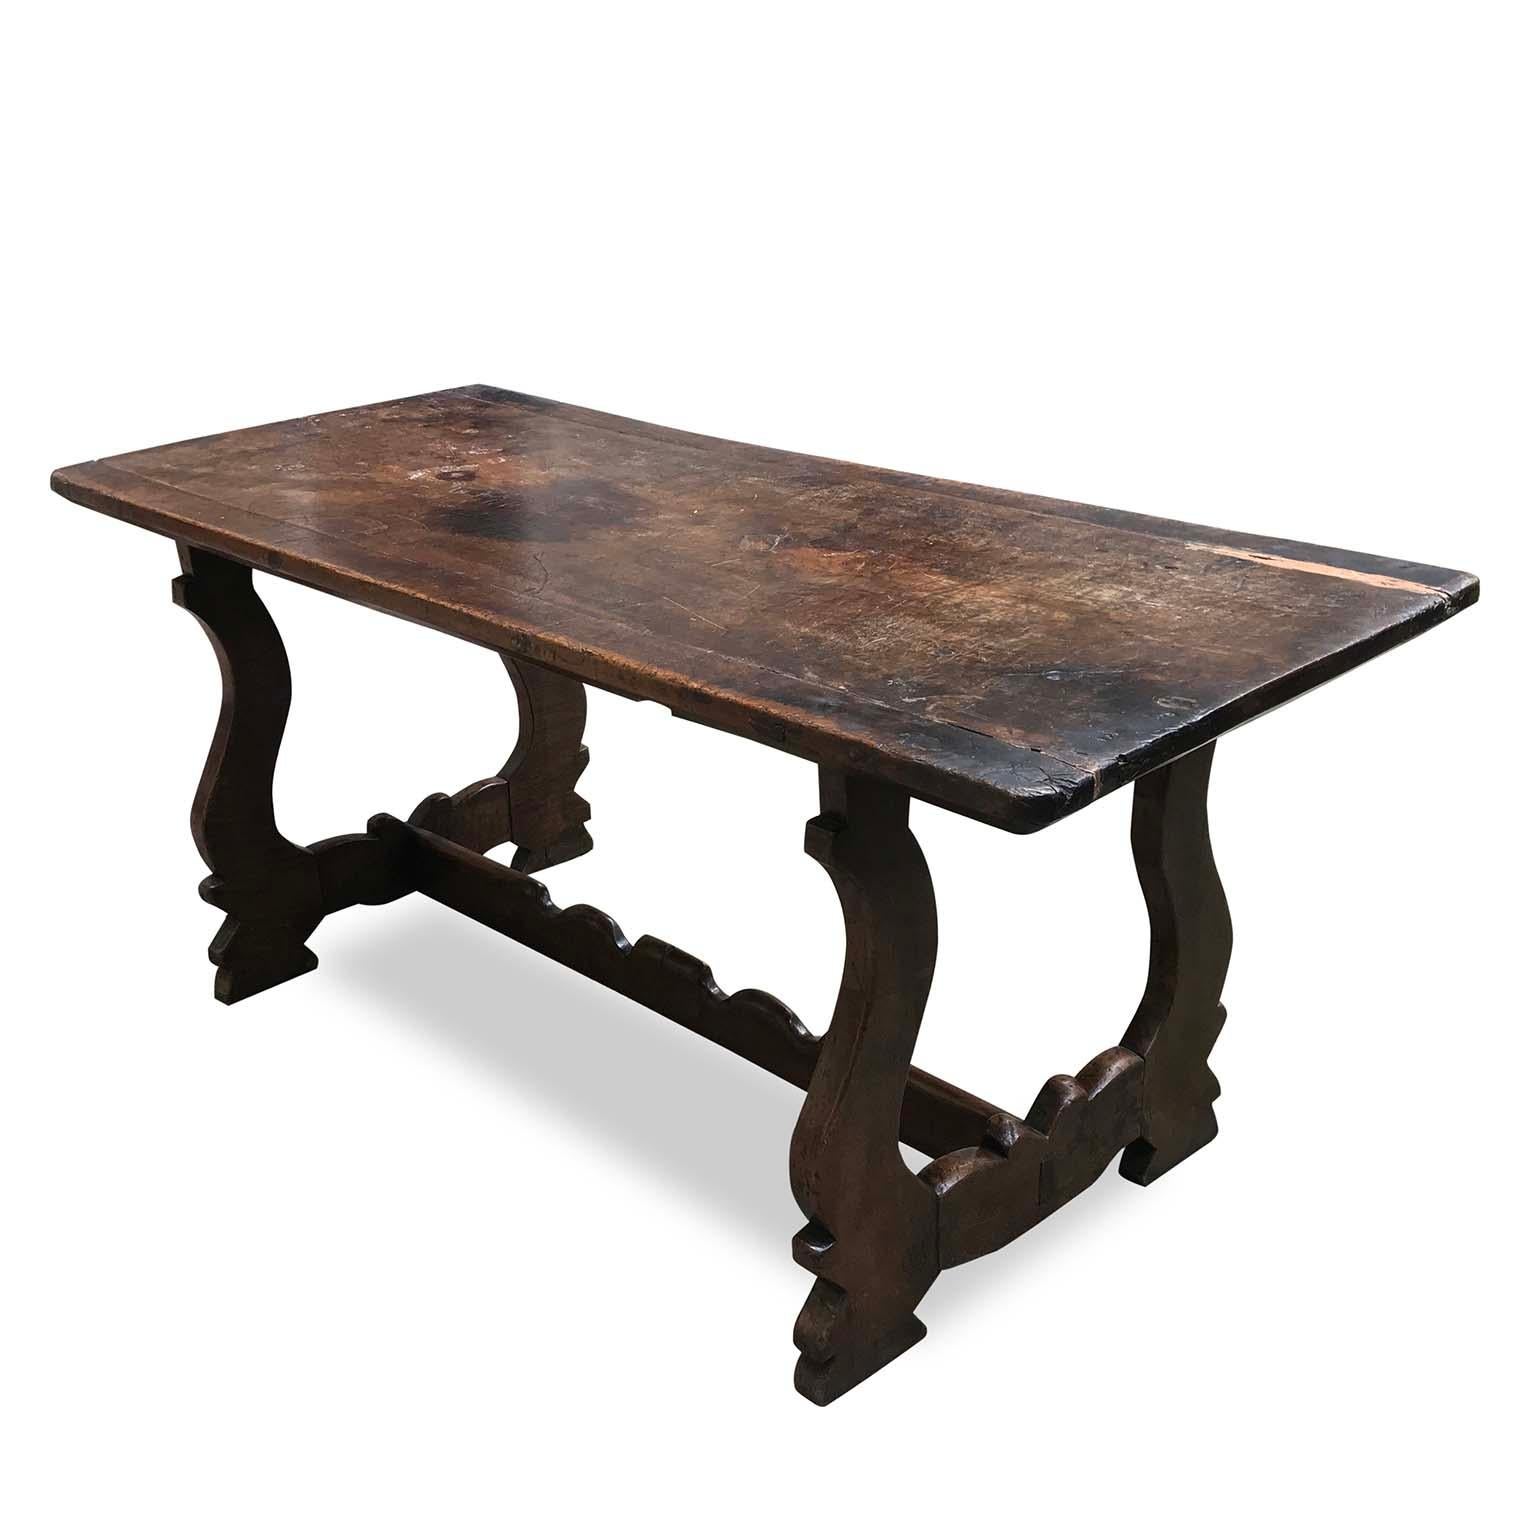 Carved 18th Century Italian Fratino Table with Lyre Legs Solid Walnut Rectangular Table For Sale